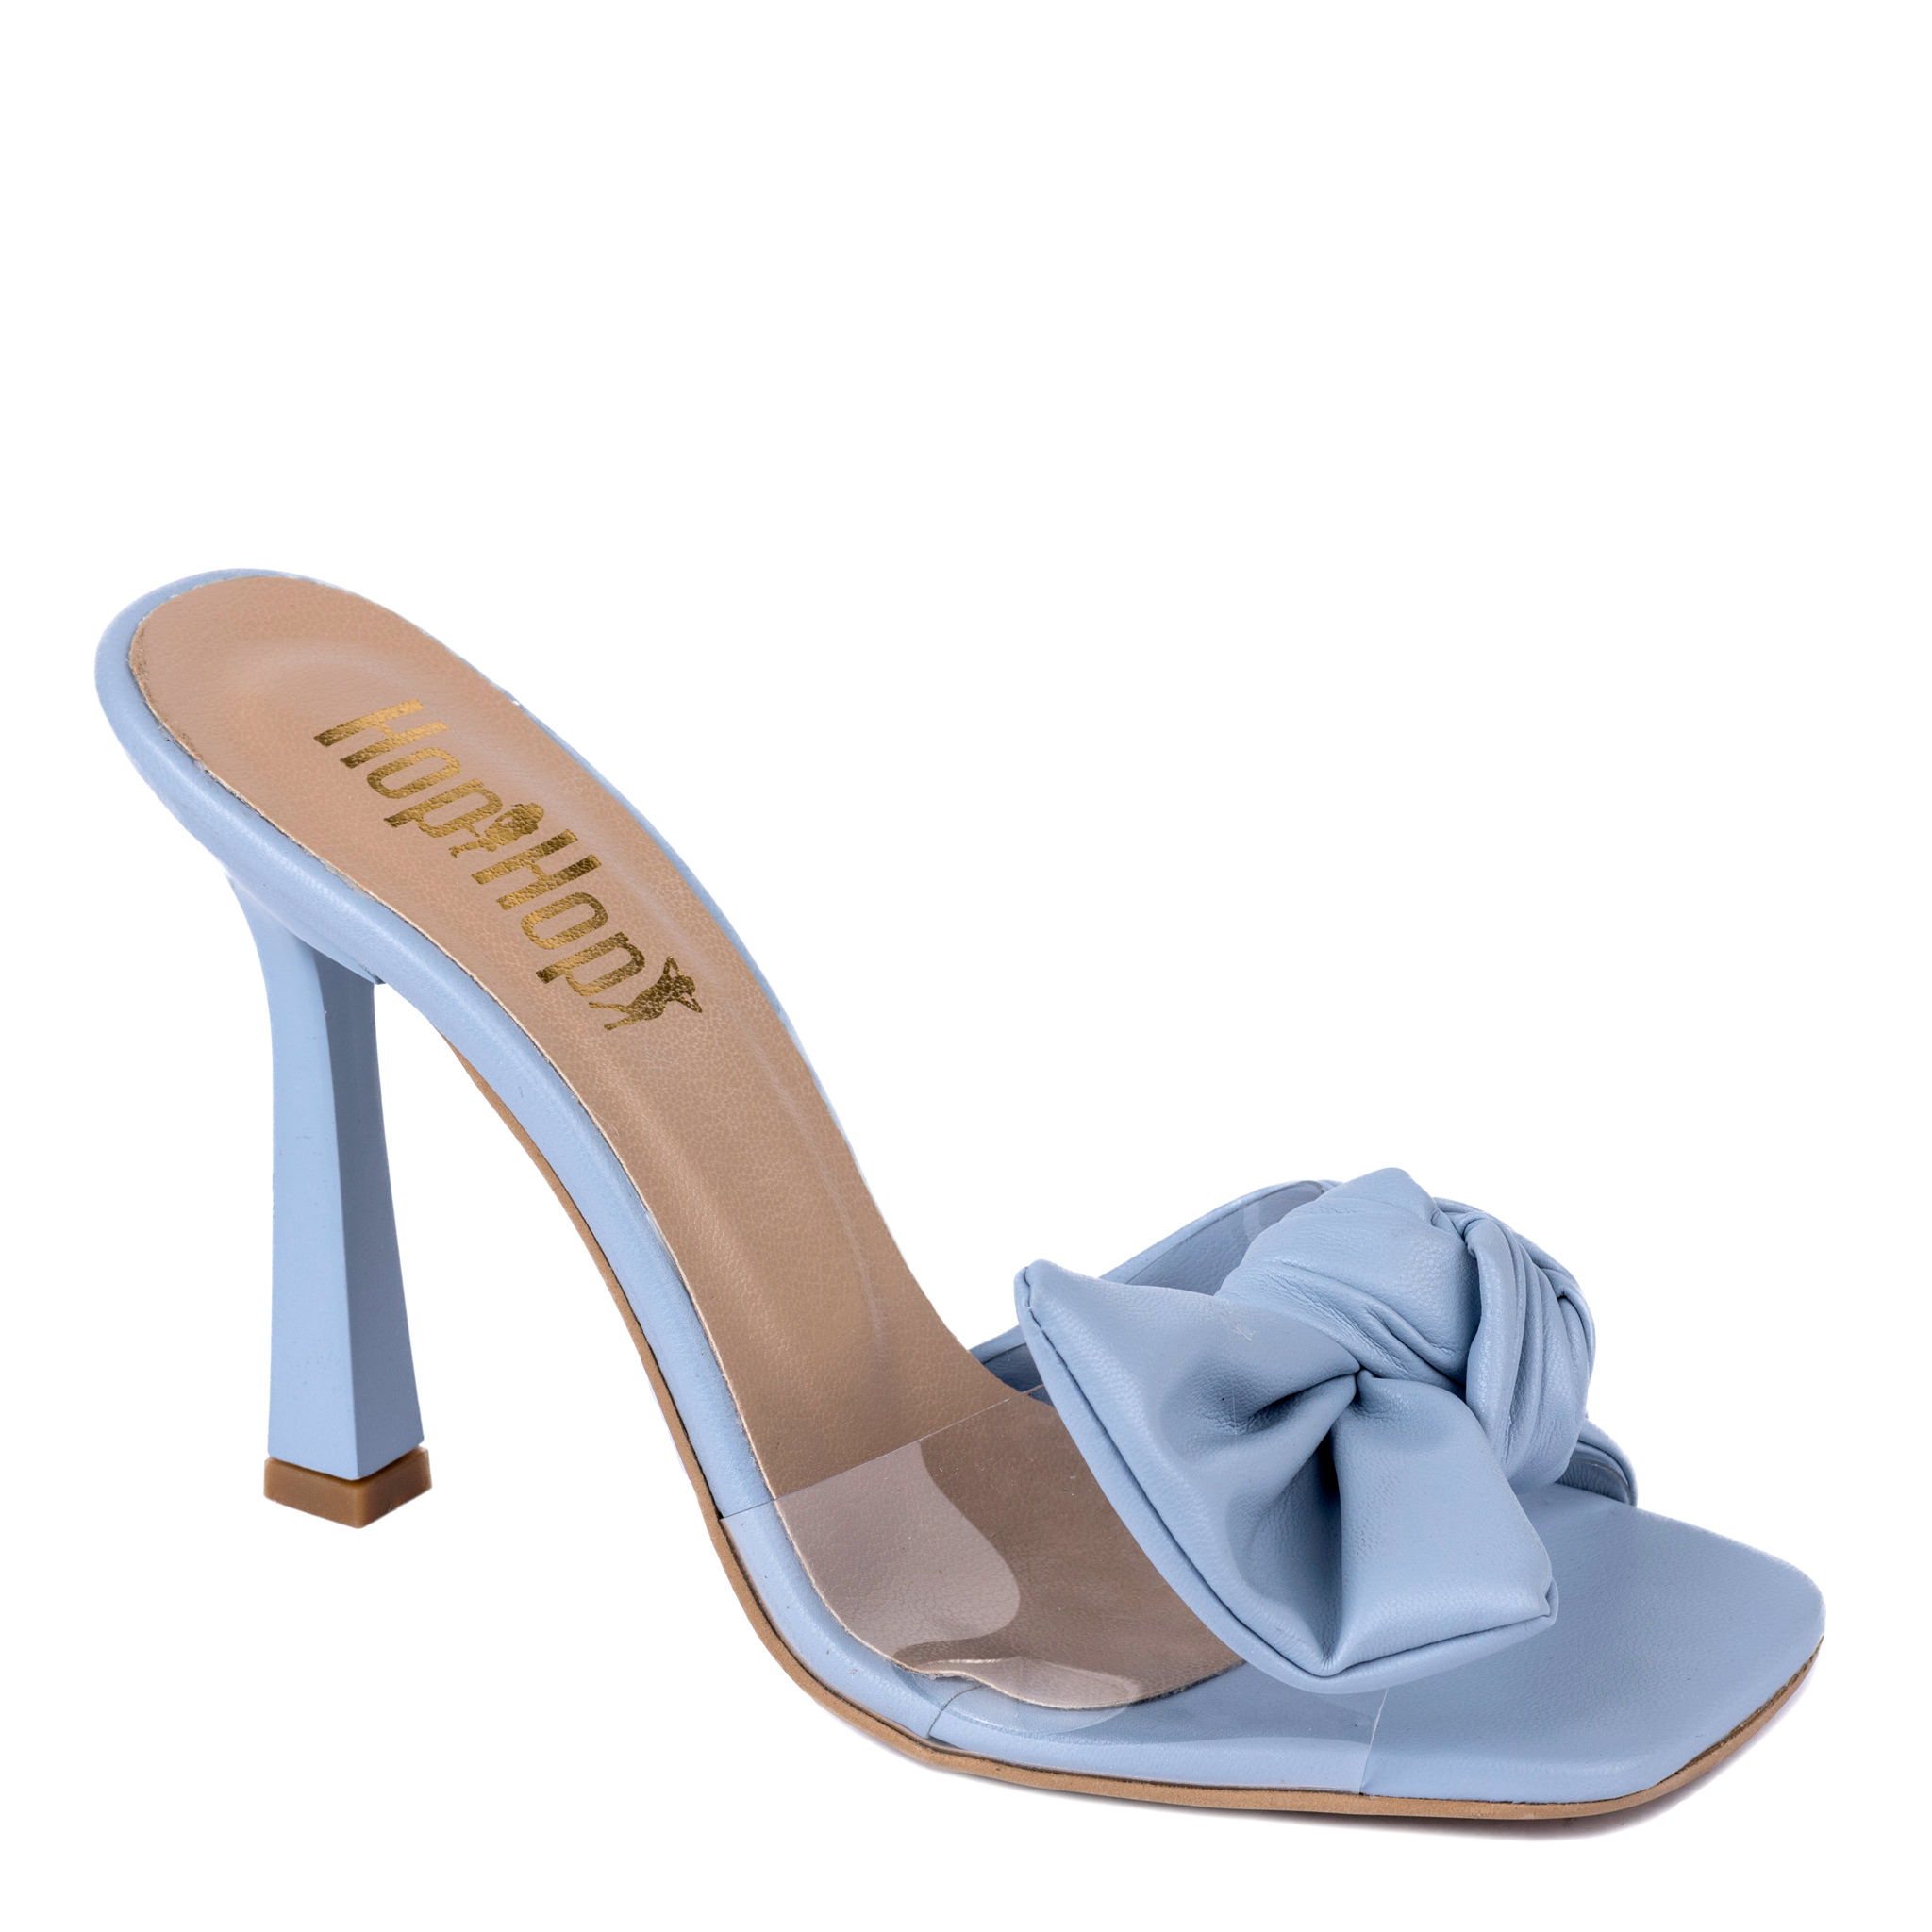 MULES WITH THIN HEEL AND BOW - BLUE